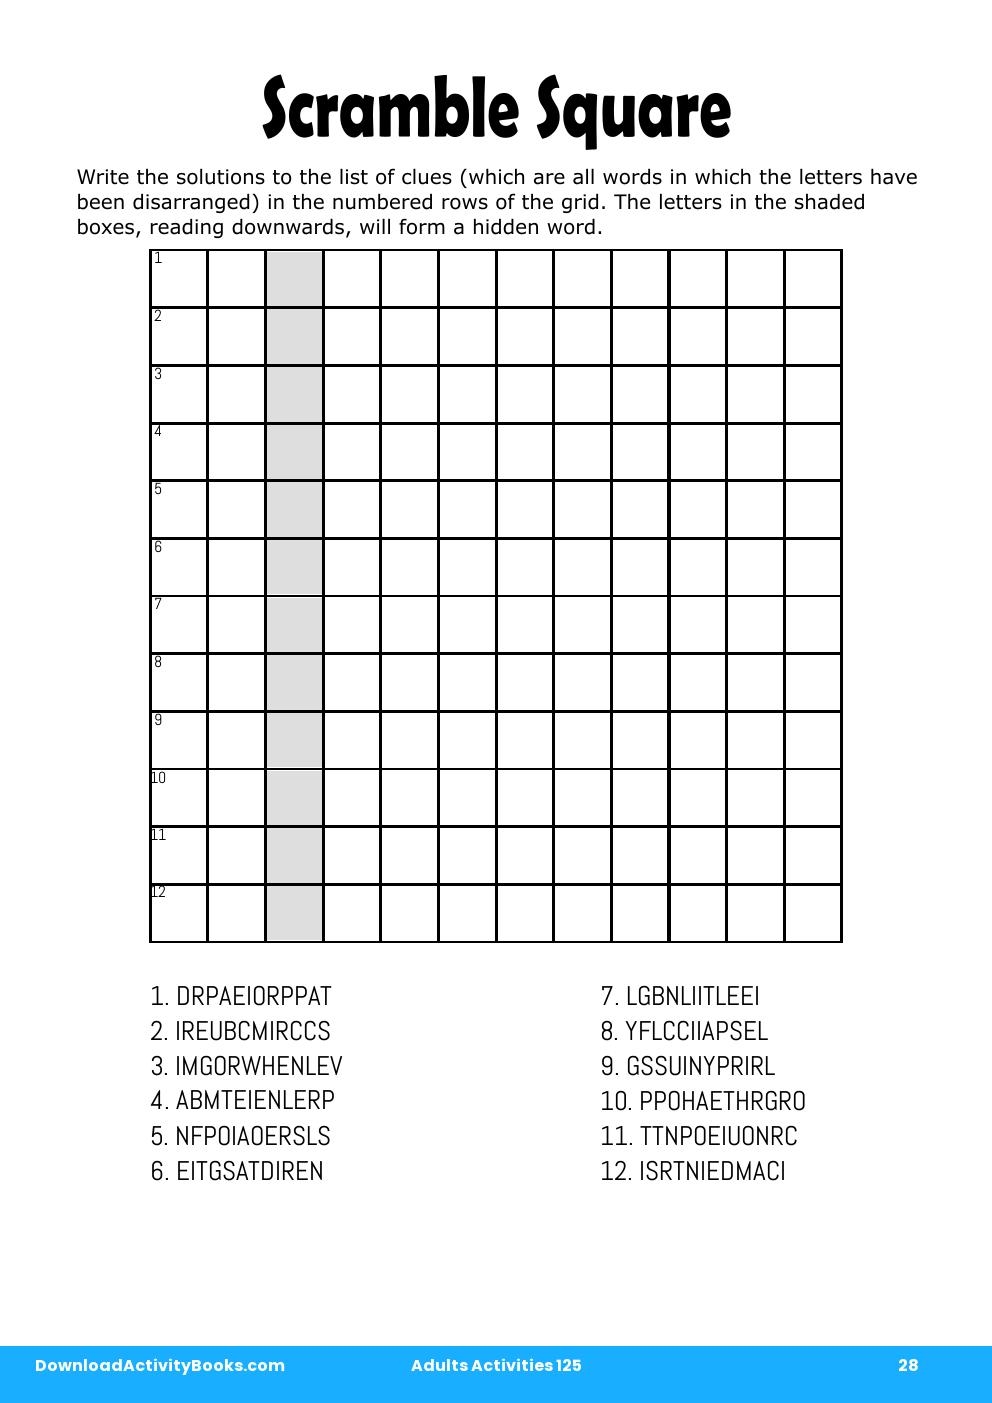 Scramble Square in Adults Activities 125